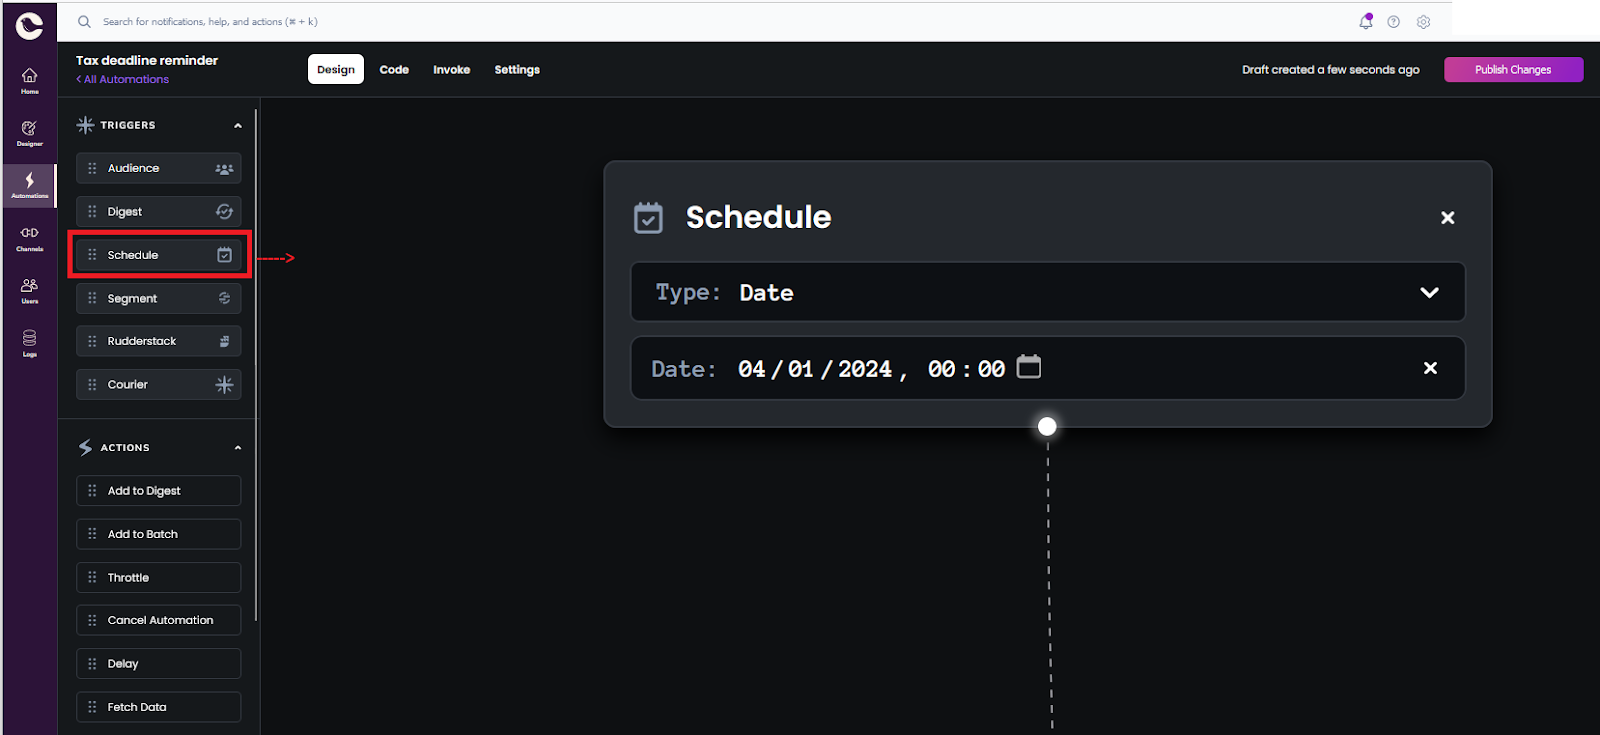 Screenshot showing how to schedule an email in the Courier automations designer.